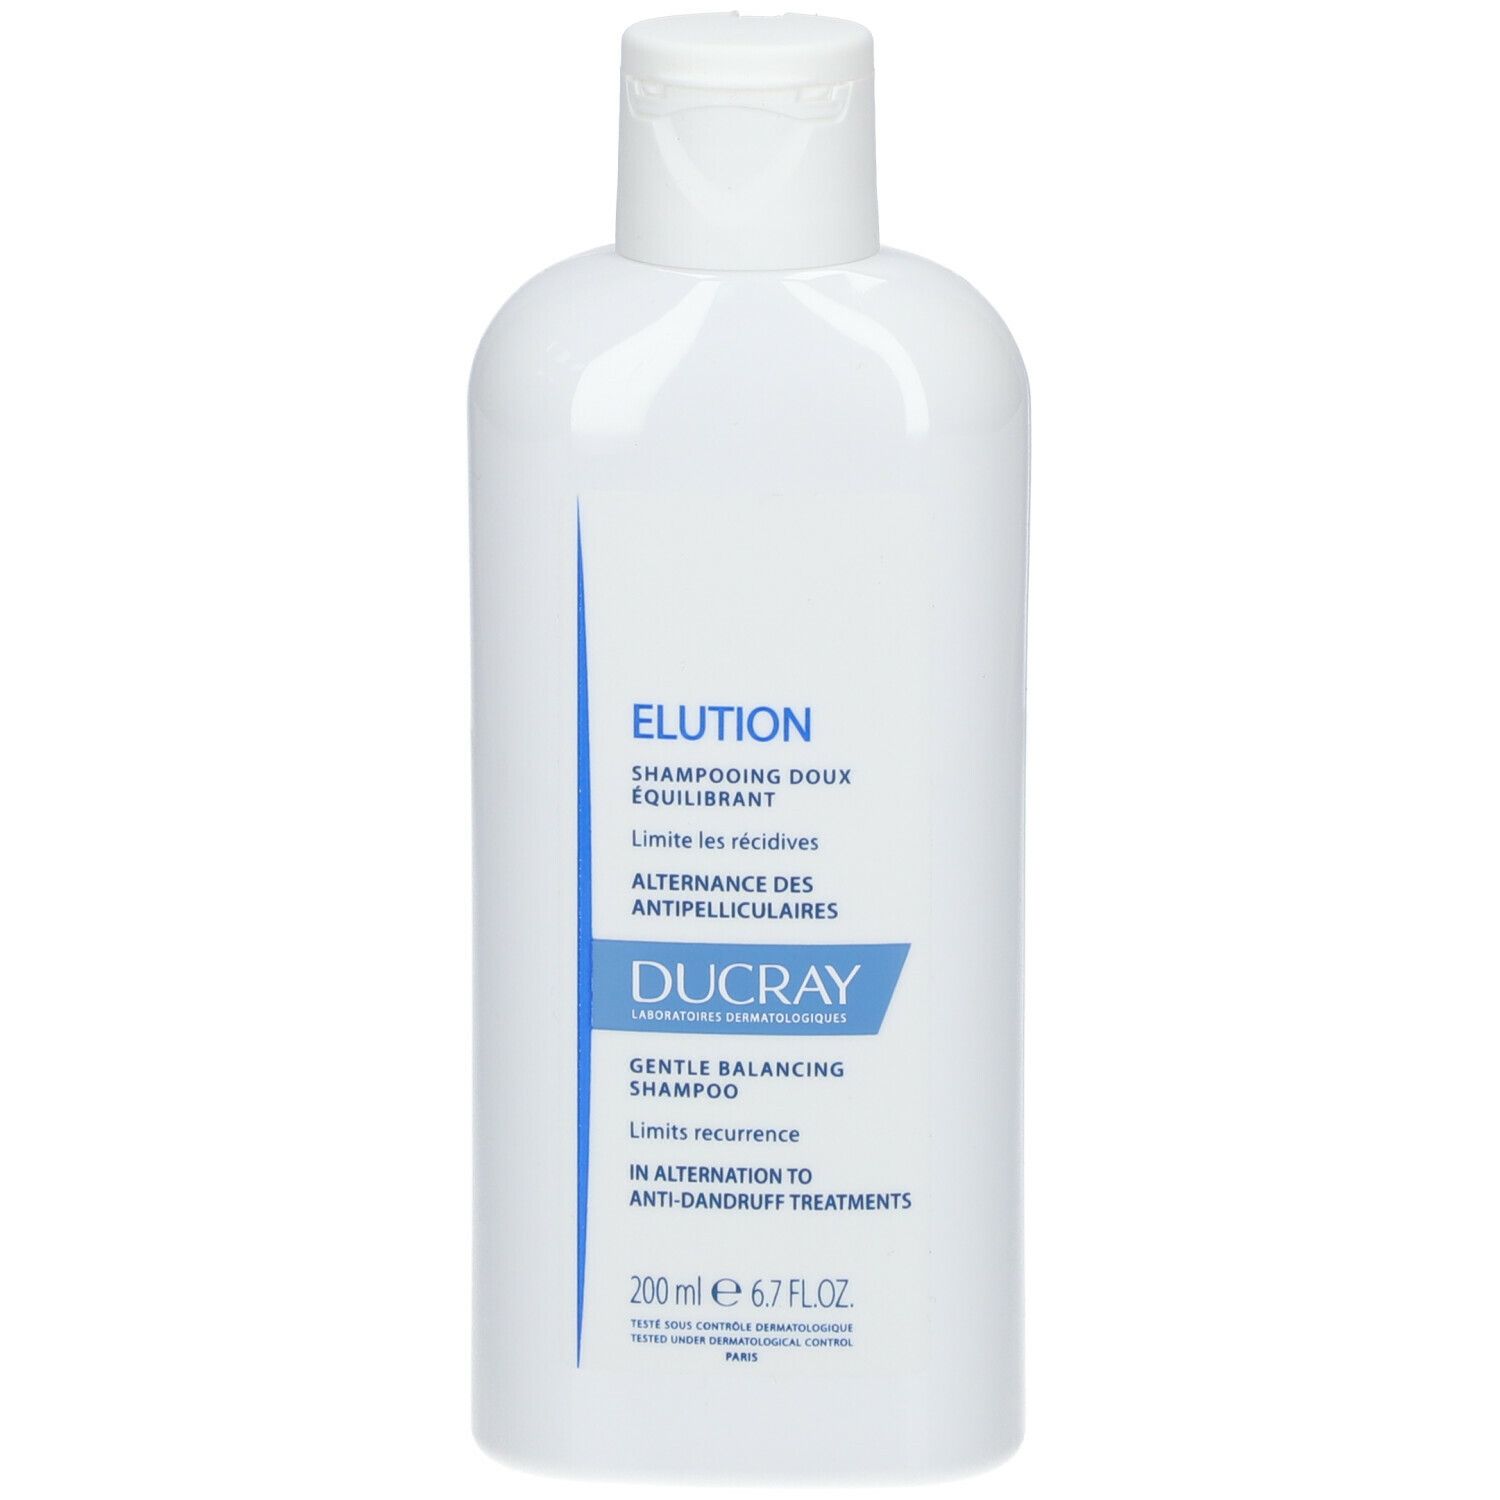 Ducray Elution Shampooing doux équilibrant